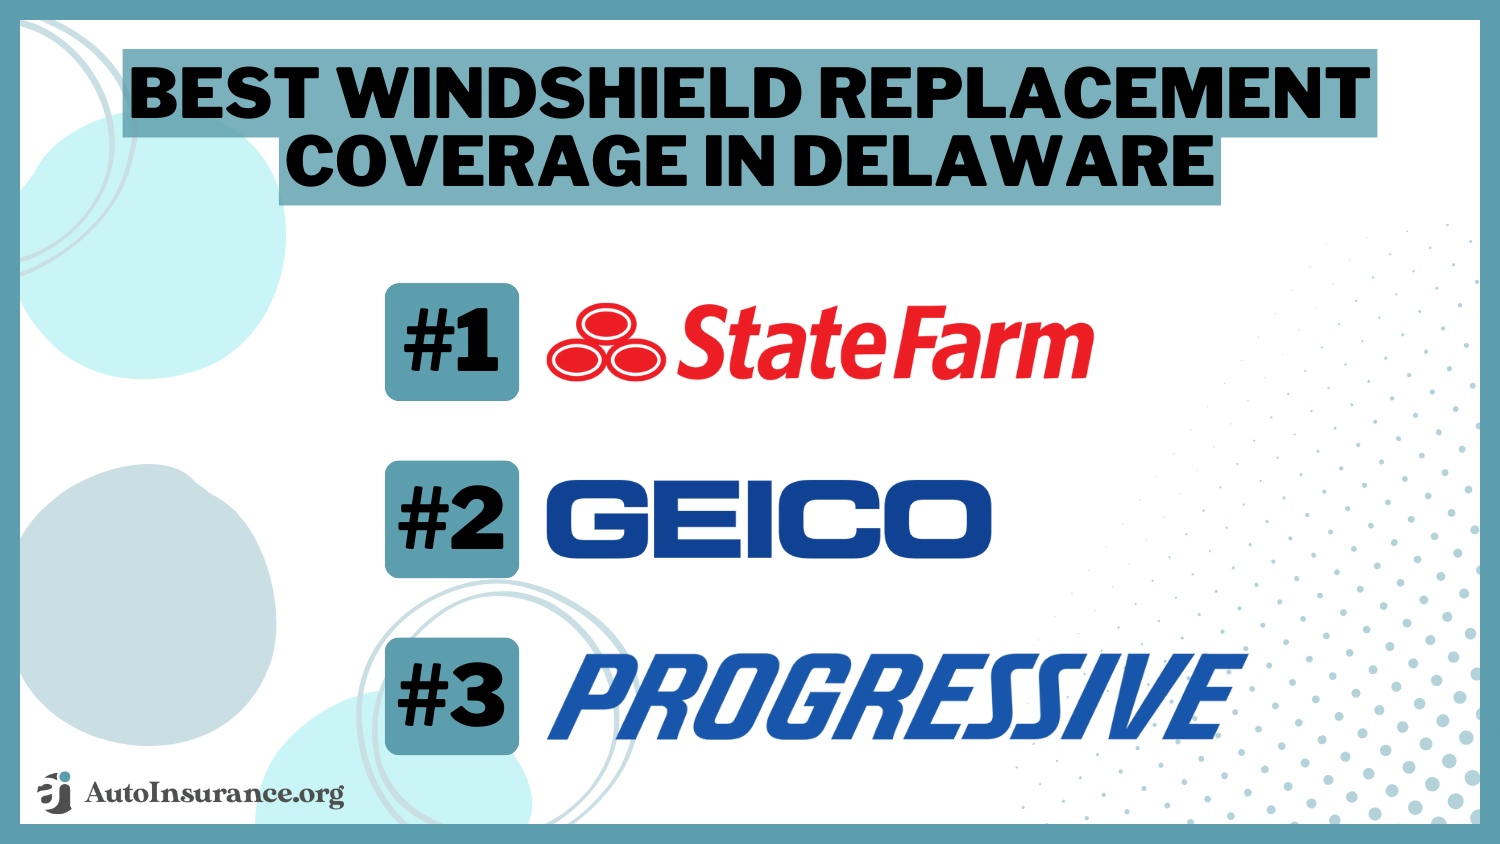 Best Windshield Replacement Coverage in Delaware: State Farm, Geico, and Progressive